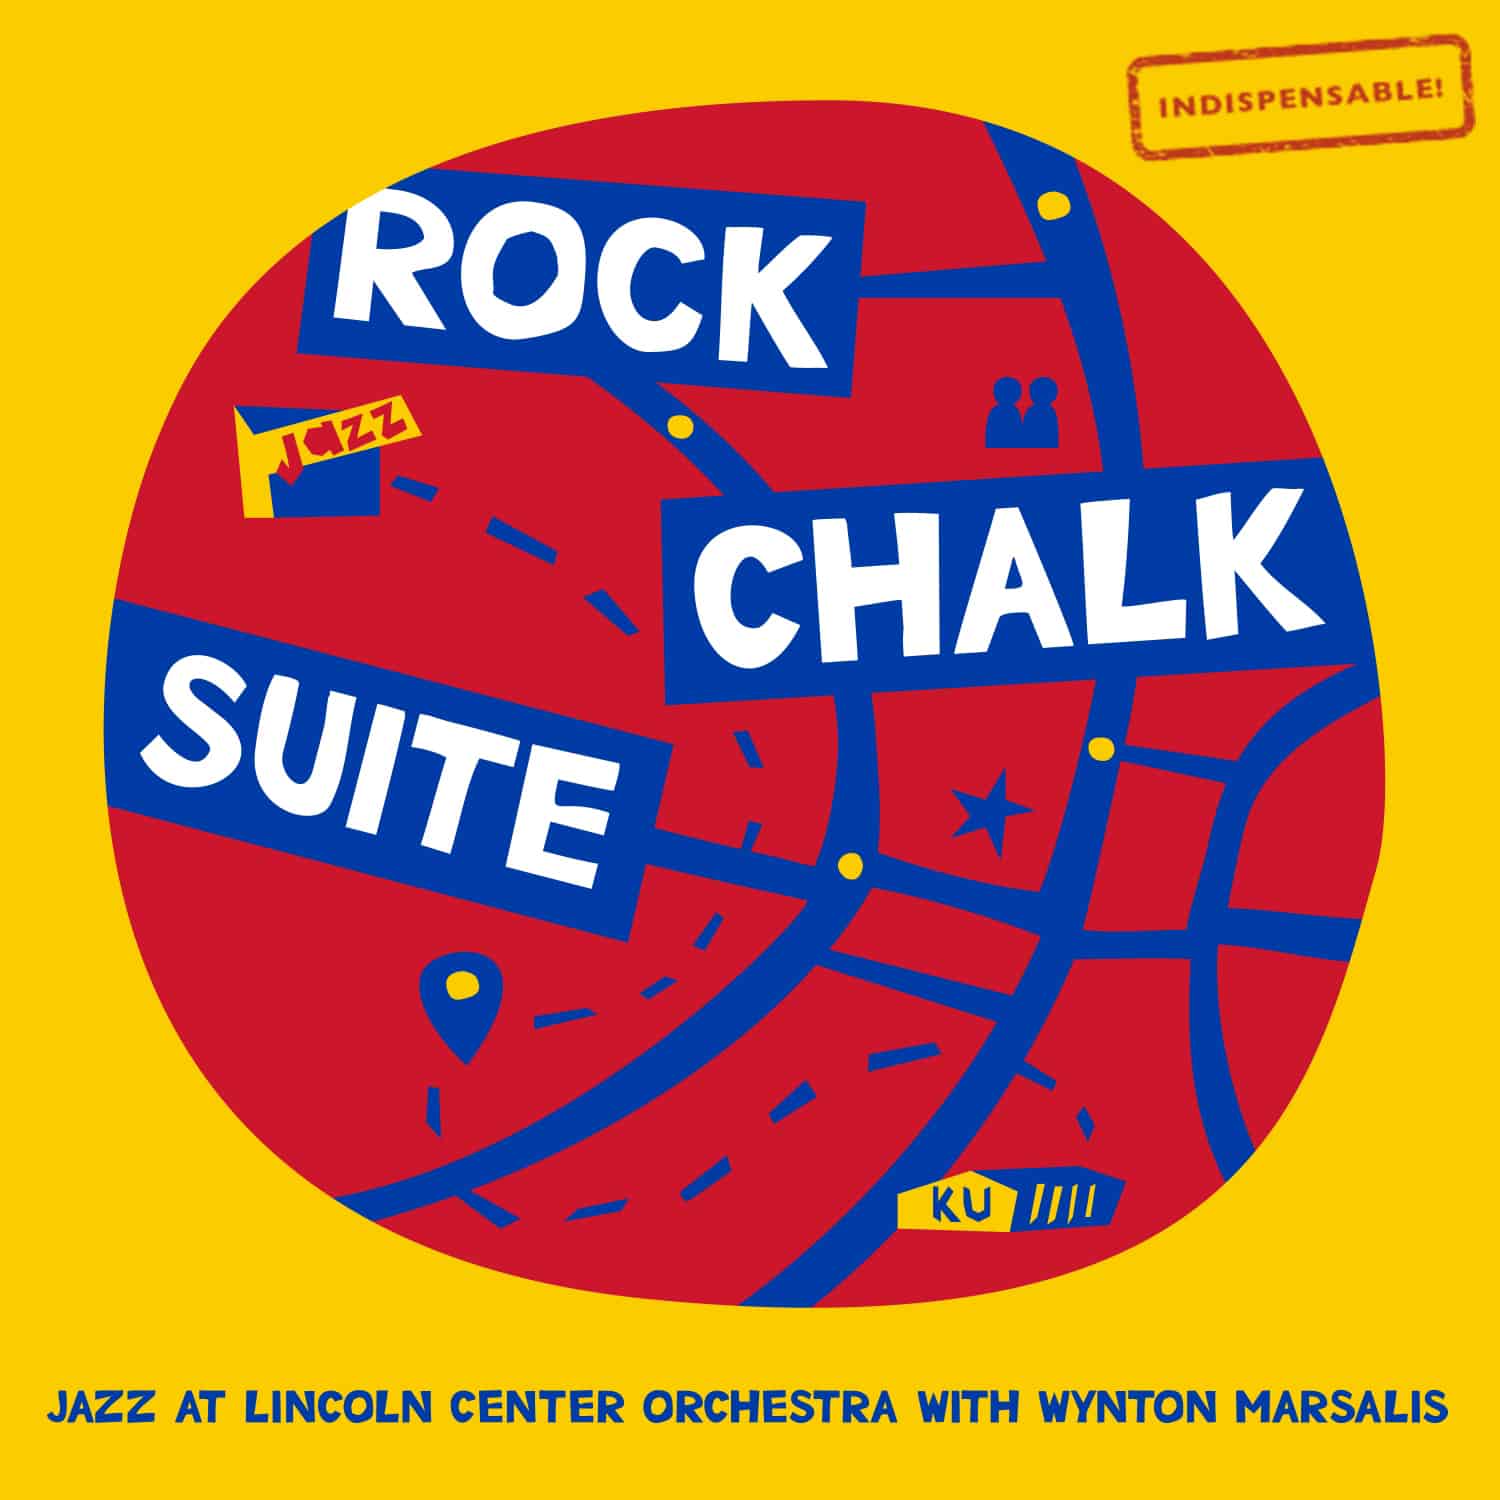 Jazz at Lincoln Center Orchestra with Wynton Marsalis – Rock Chalk Suite